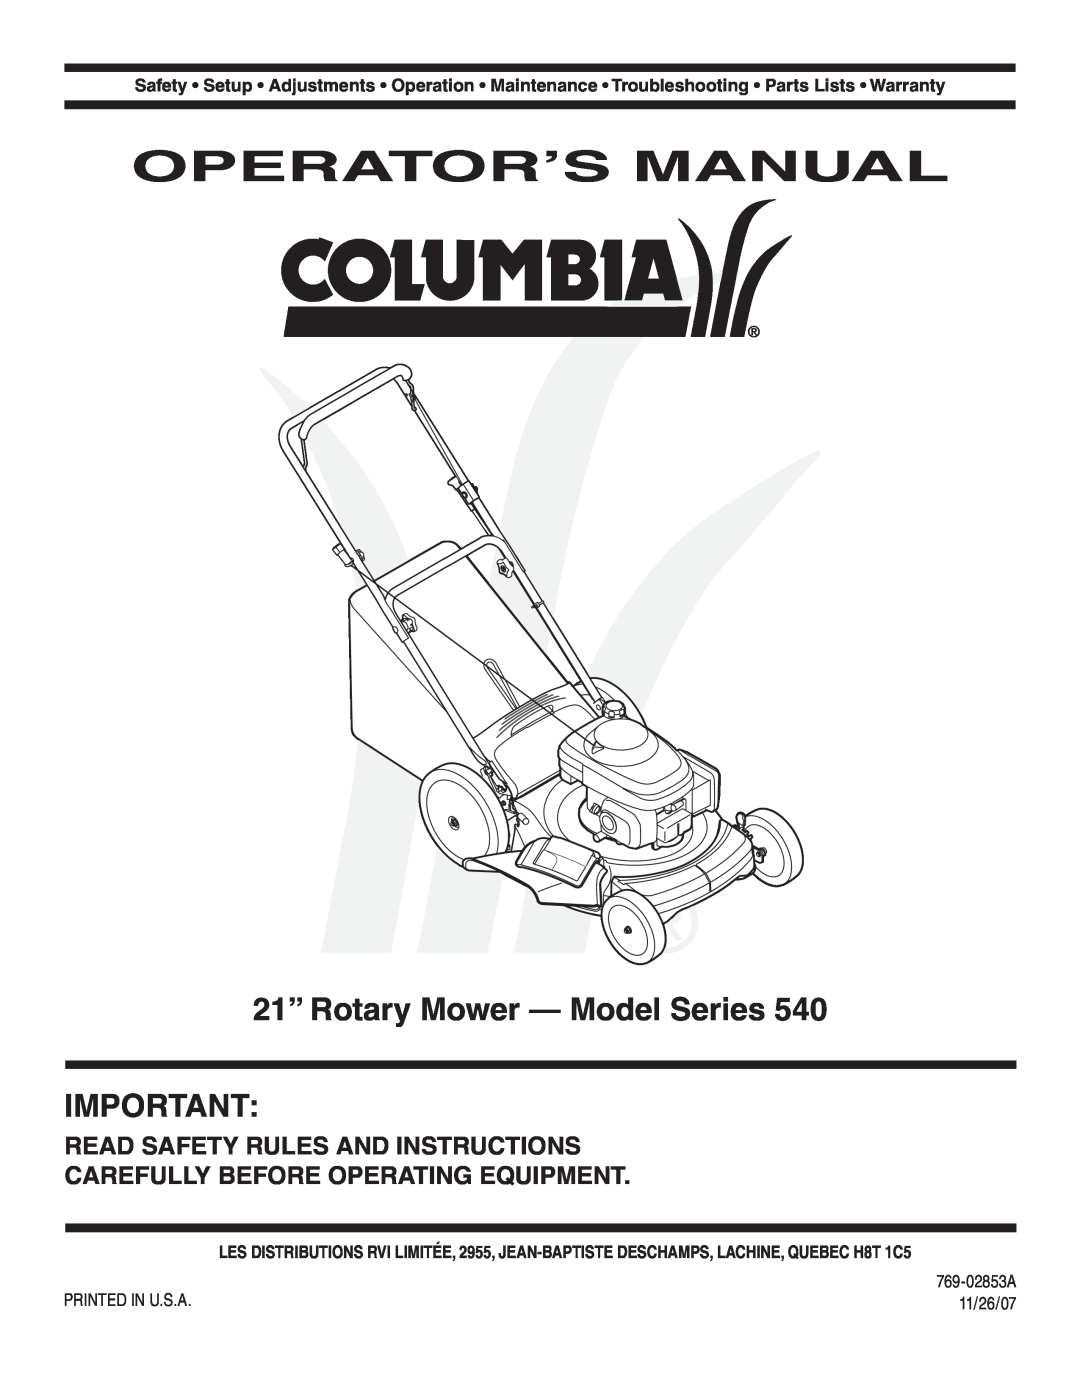 Columbian Home Products 540 warranty Operator’S Manual, 21” Rotary Mower - Model Series 